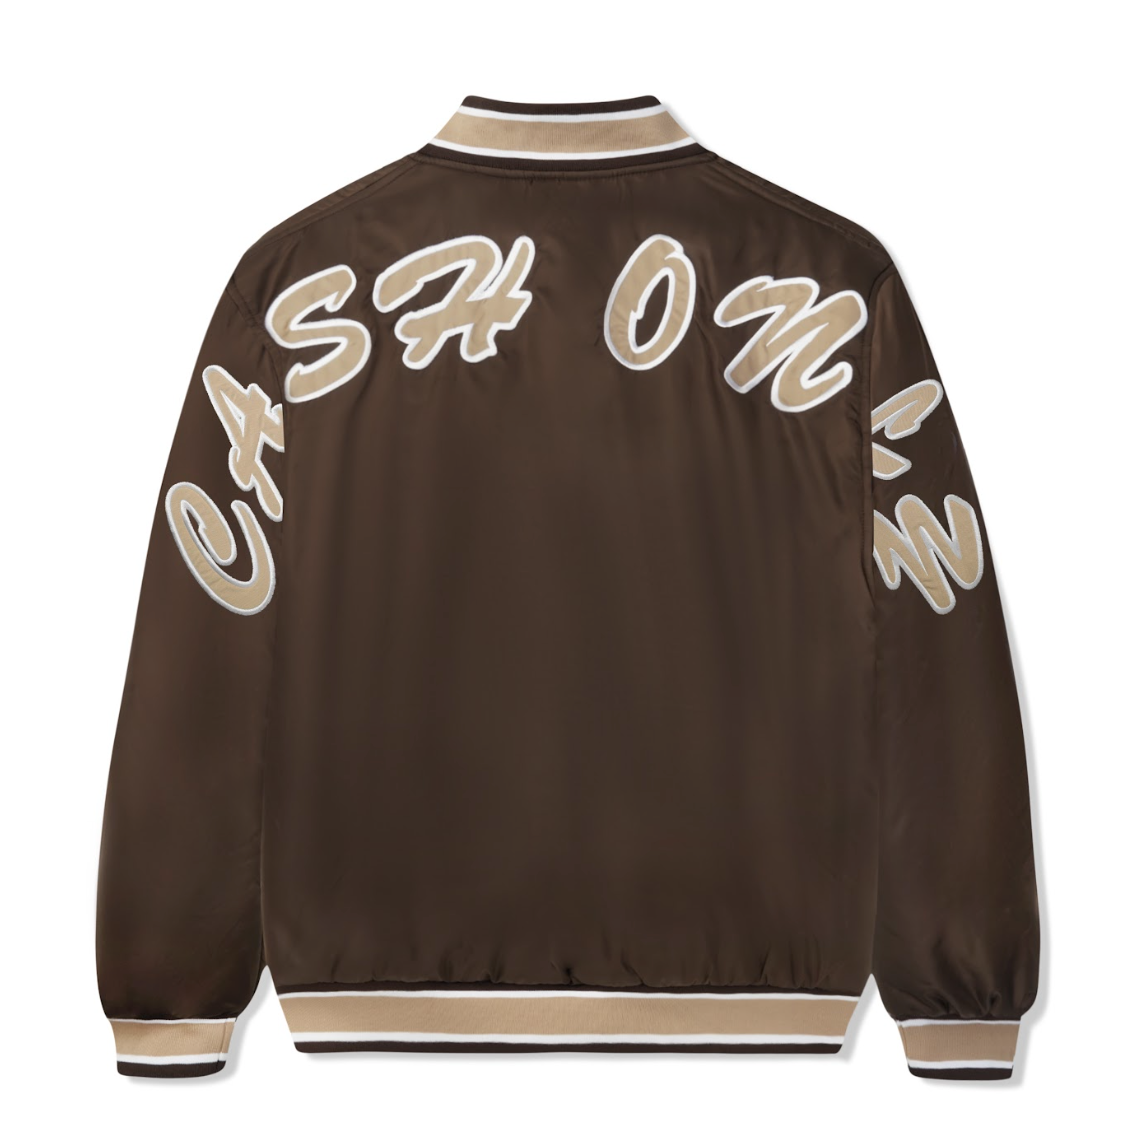 Cash Only - Spell Out Bomber Jacket - Brown